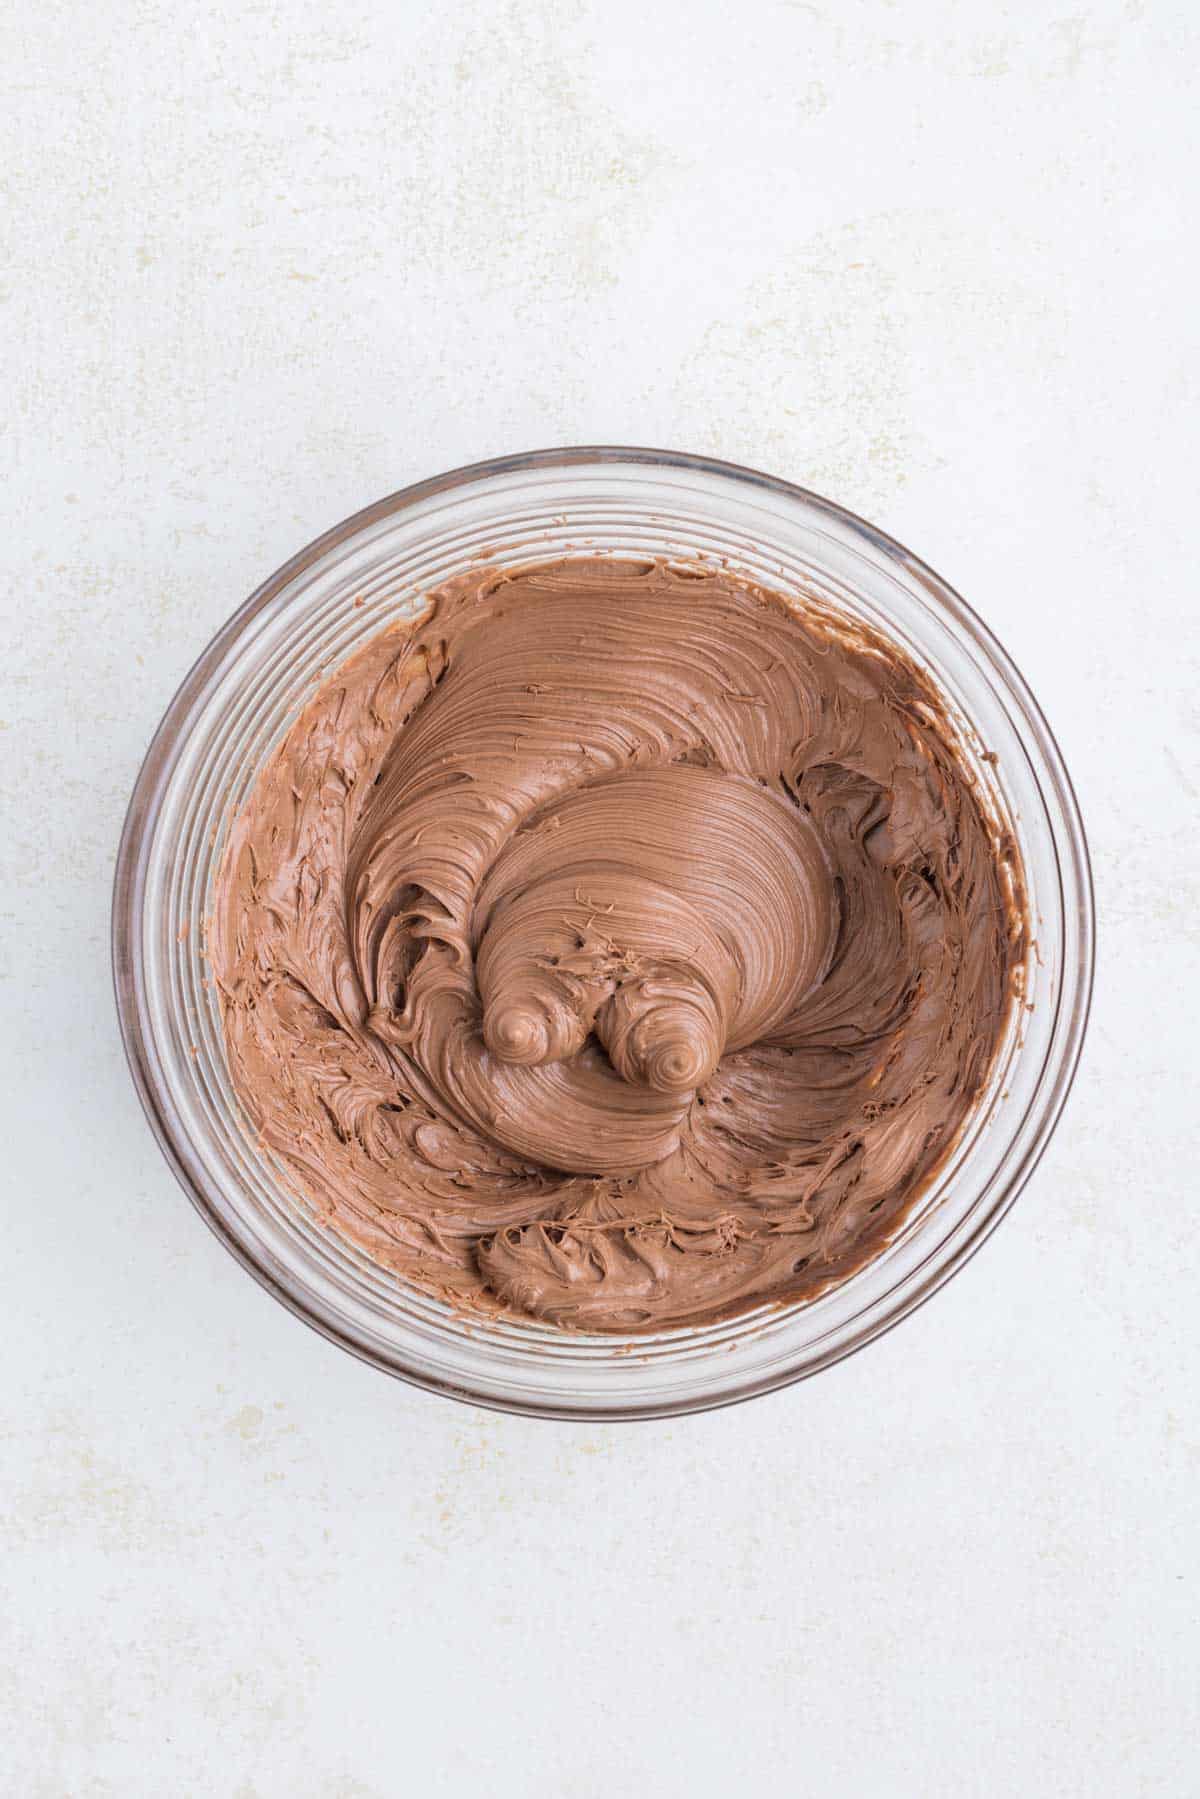 whipped chocolate frosting in a bowl